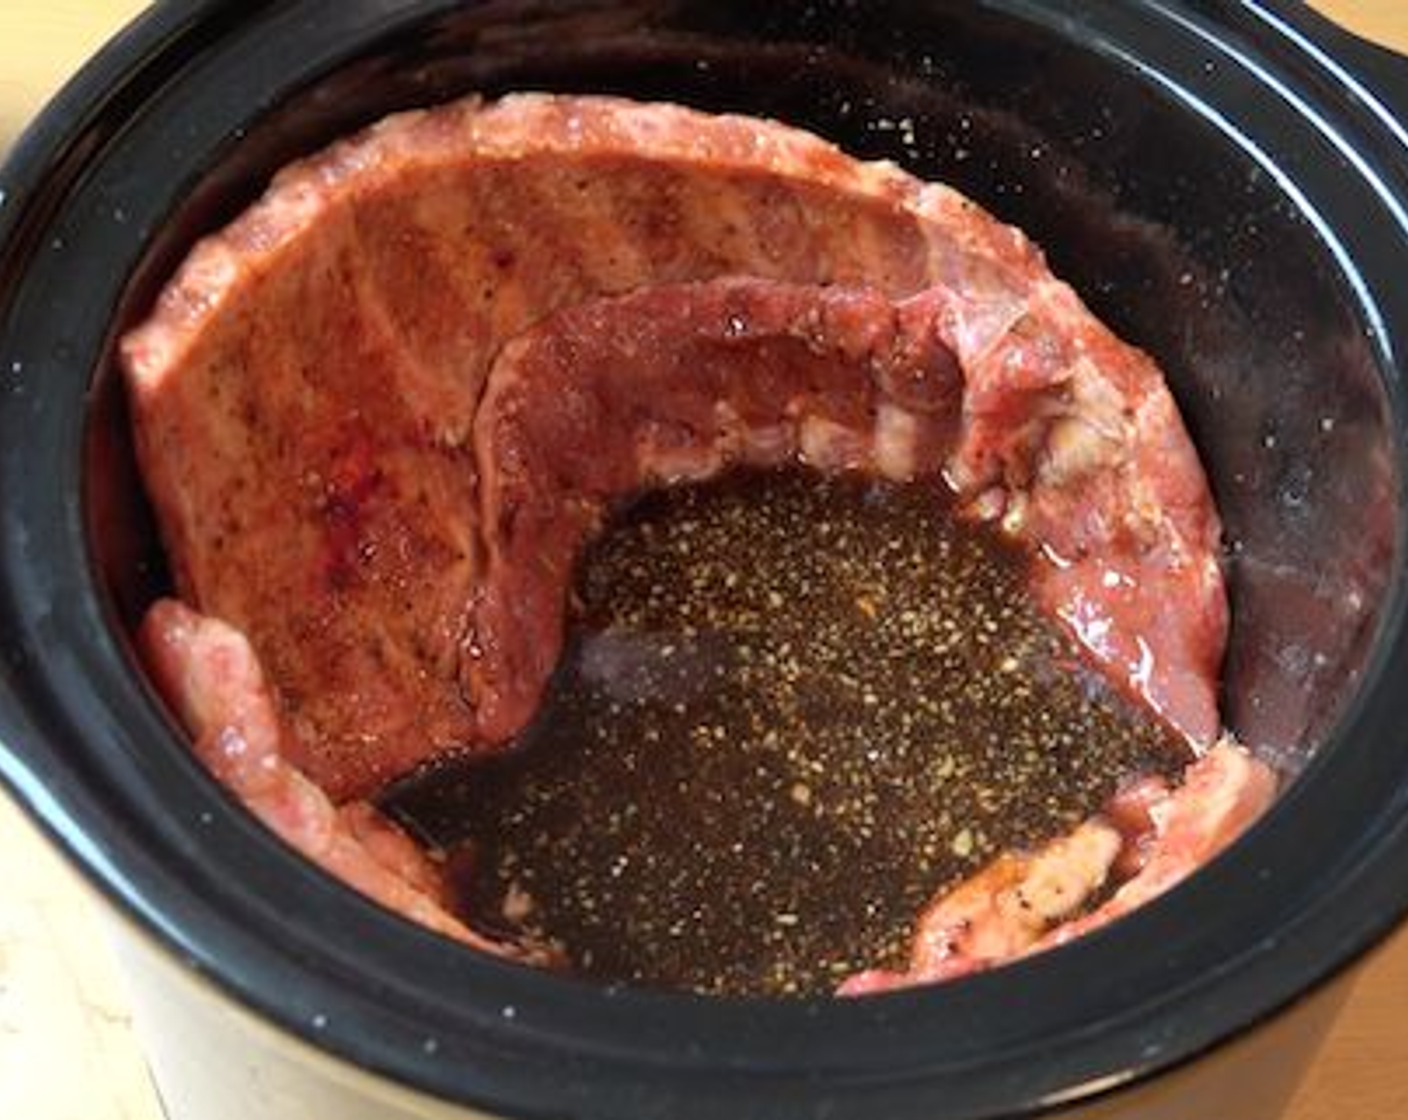 step 3 Next, add your pork ribs into the slow cooker and dredge into the sauce and turn to make sure they are well coated with the sauce all over. Place them meat side out on the edge of the cooker making sure the bones are facing up and inward.